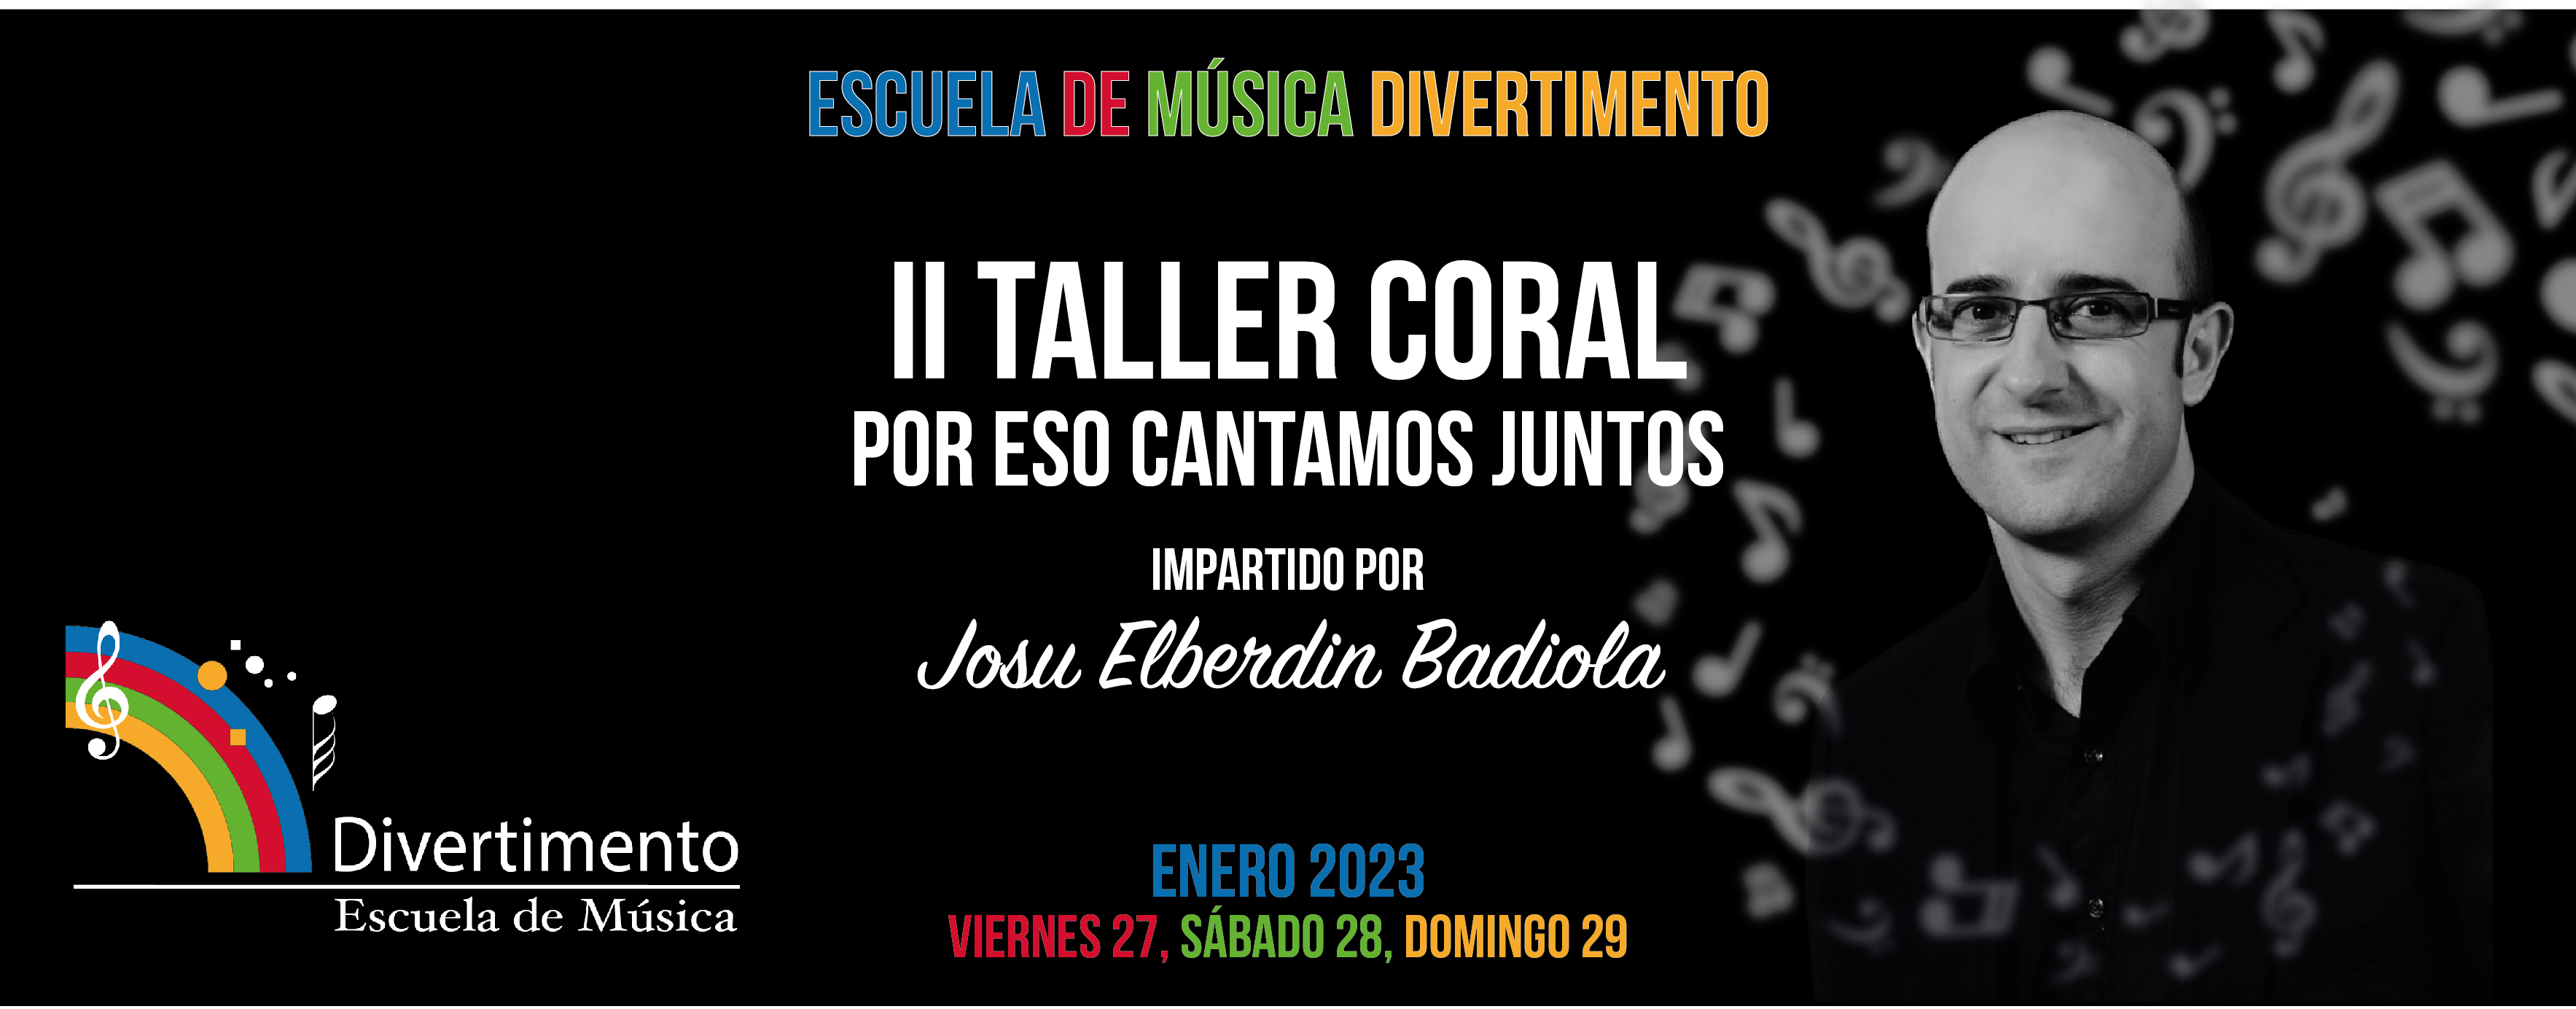 II Taller Coral 